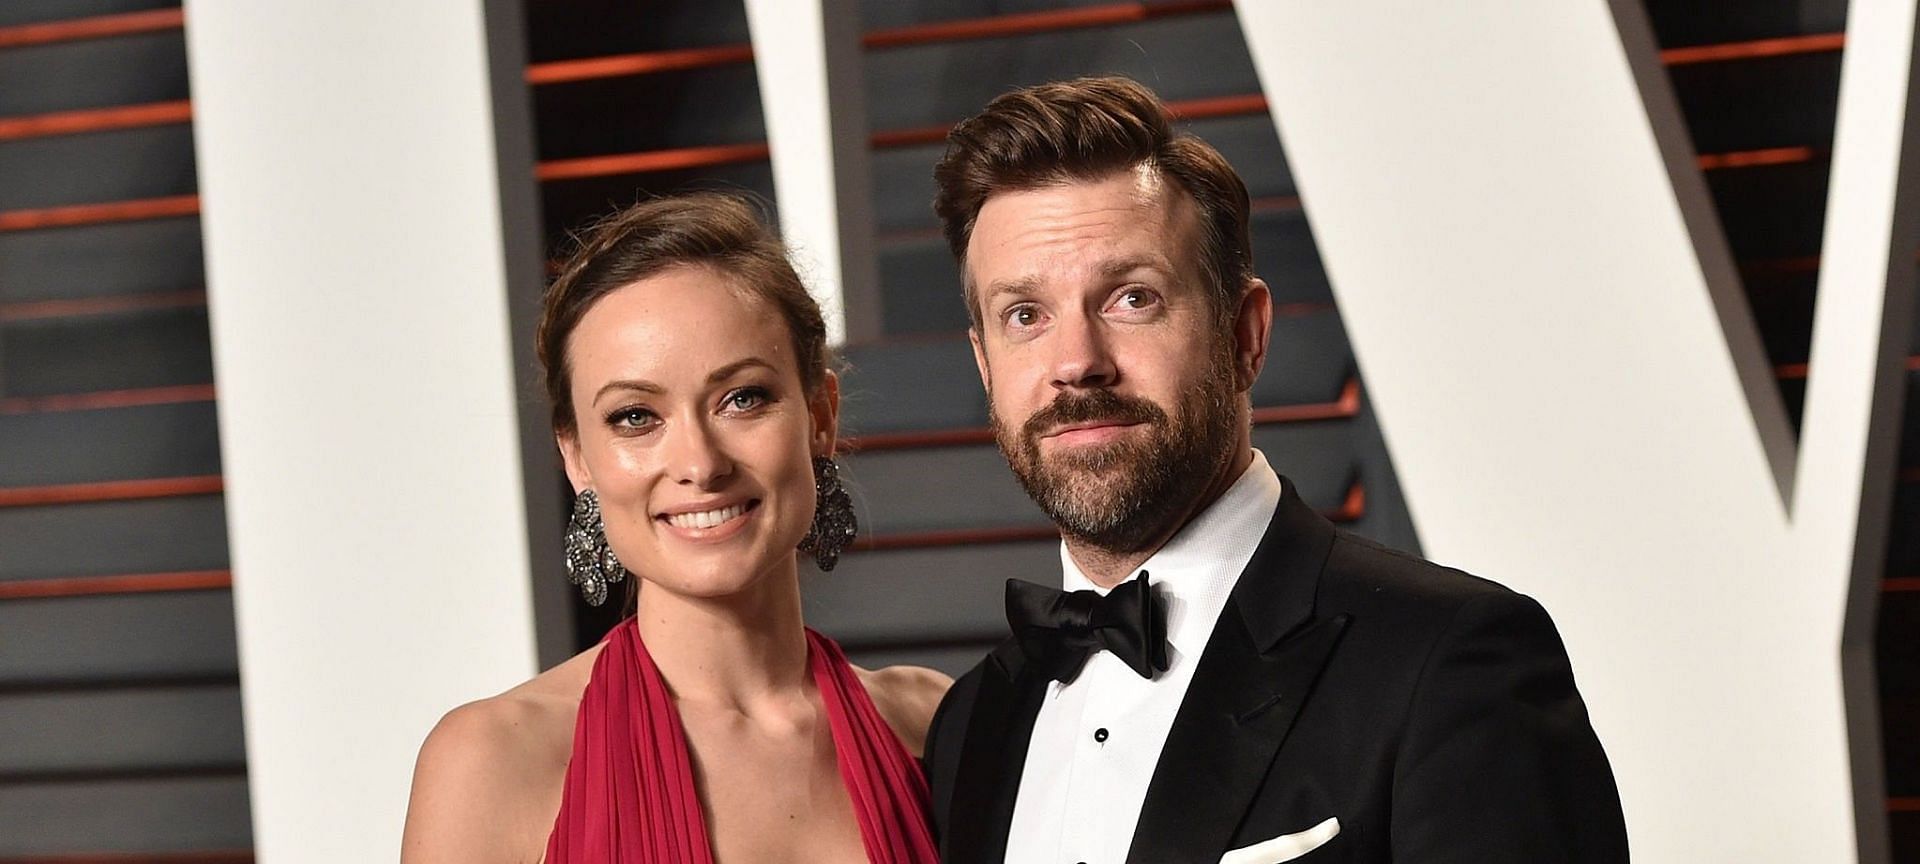 Olivia Wilde and Jason Sudeikis parted ways in 2020 but continued to co-parent their children (Image via John Shearer/Getty Images)